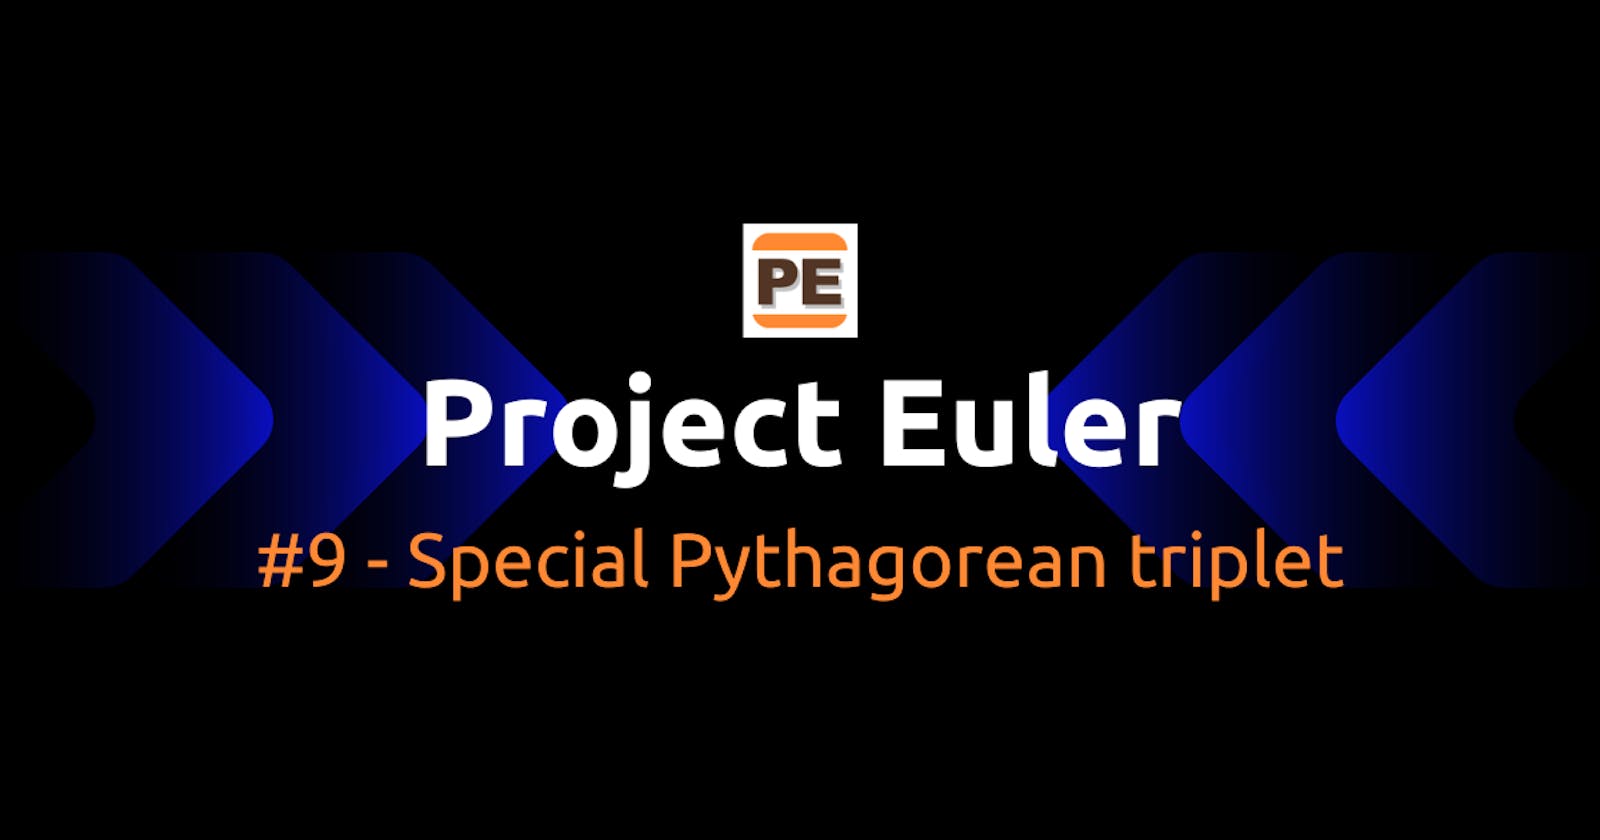 Project Euler: #9 - Special Pythagorean triplet